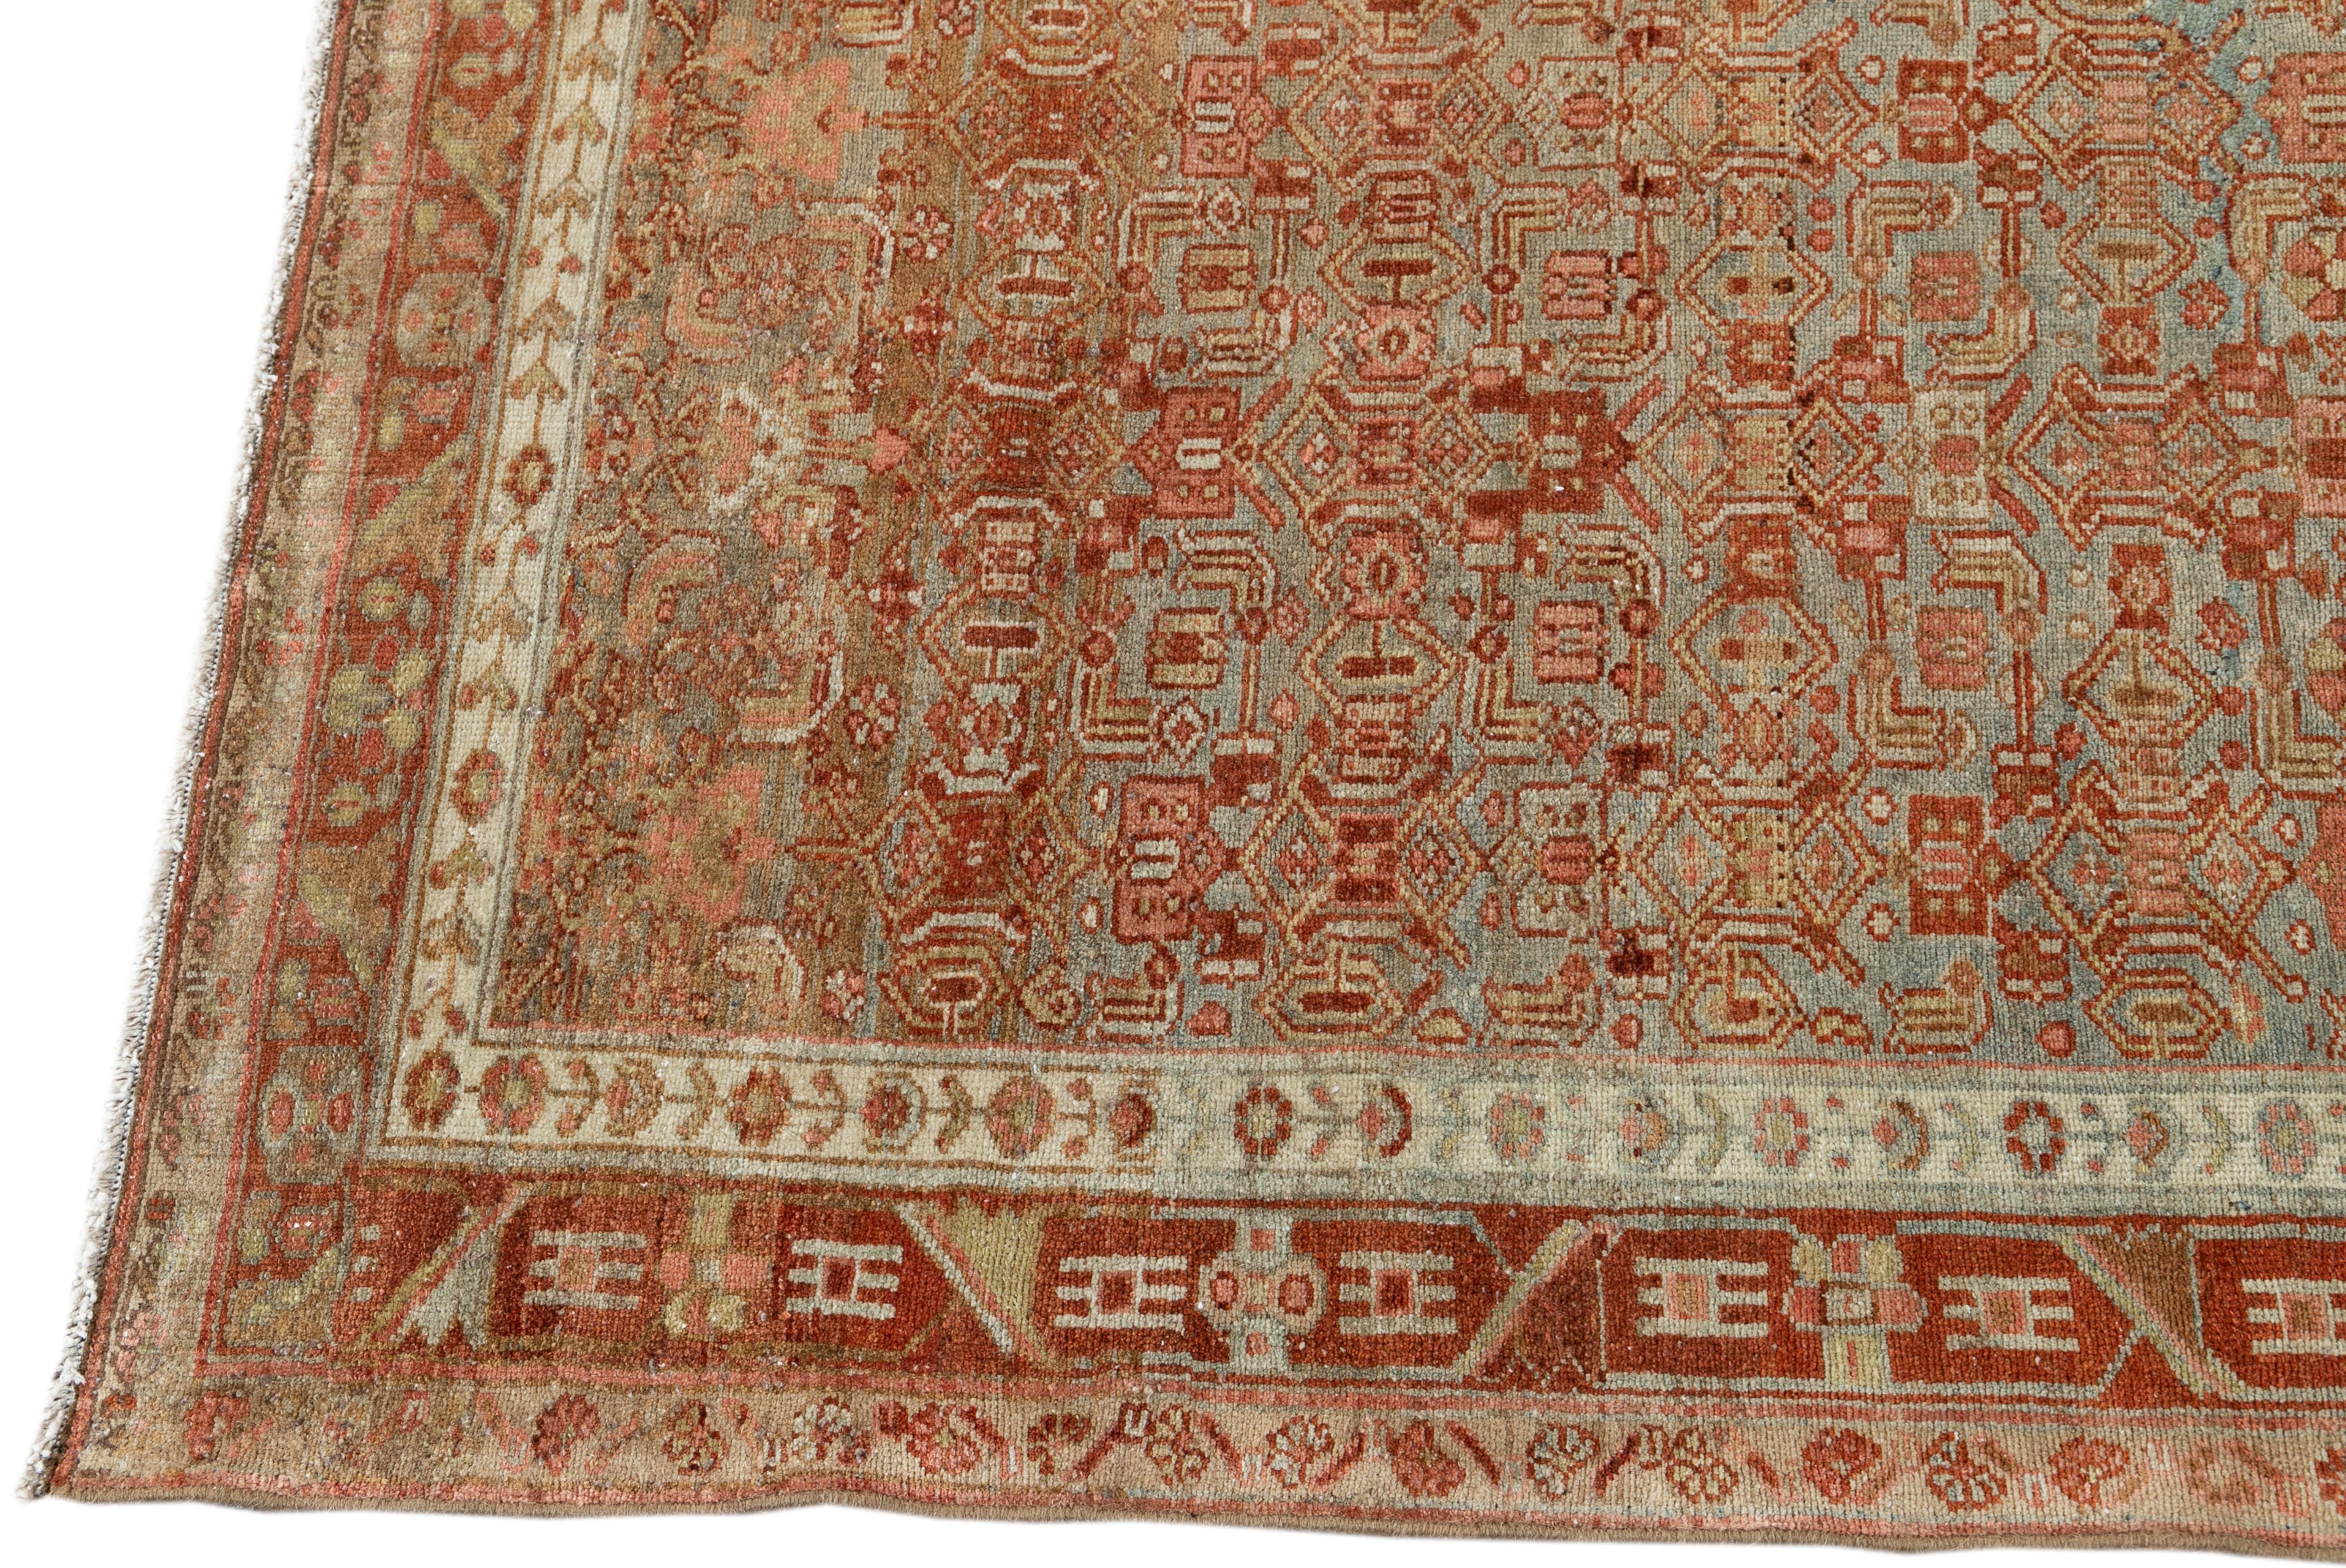 Early 20th Century Antique Malayer Wool Runner Rug In Good Condition For Sale In Norwalk, CT